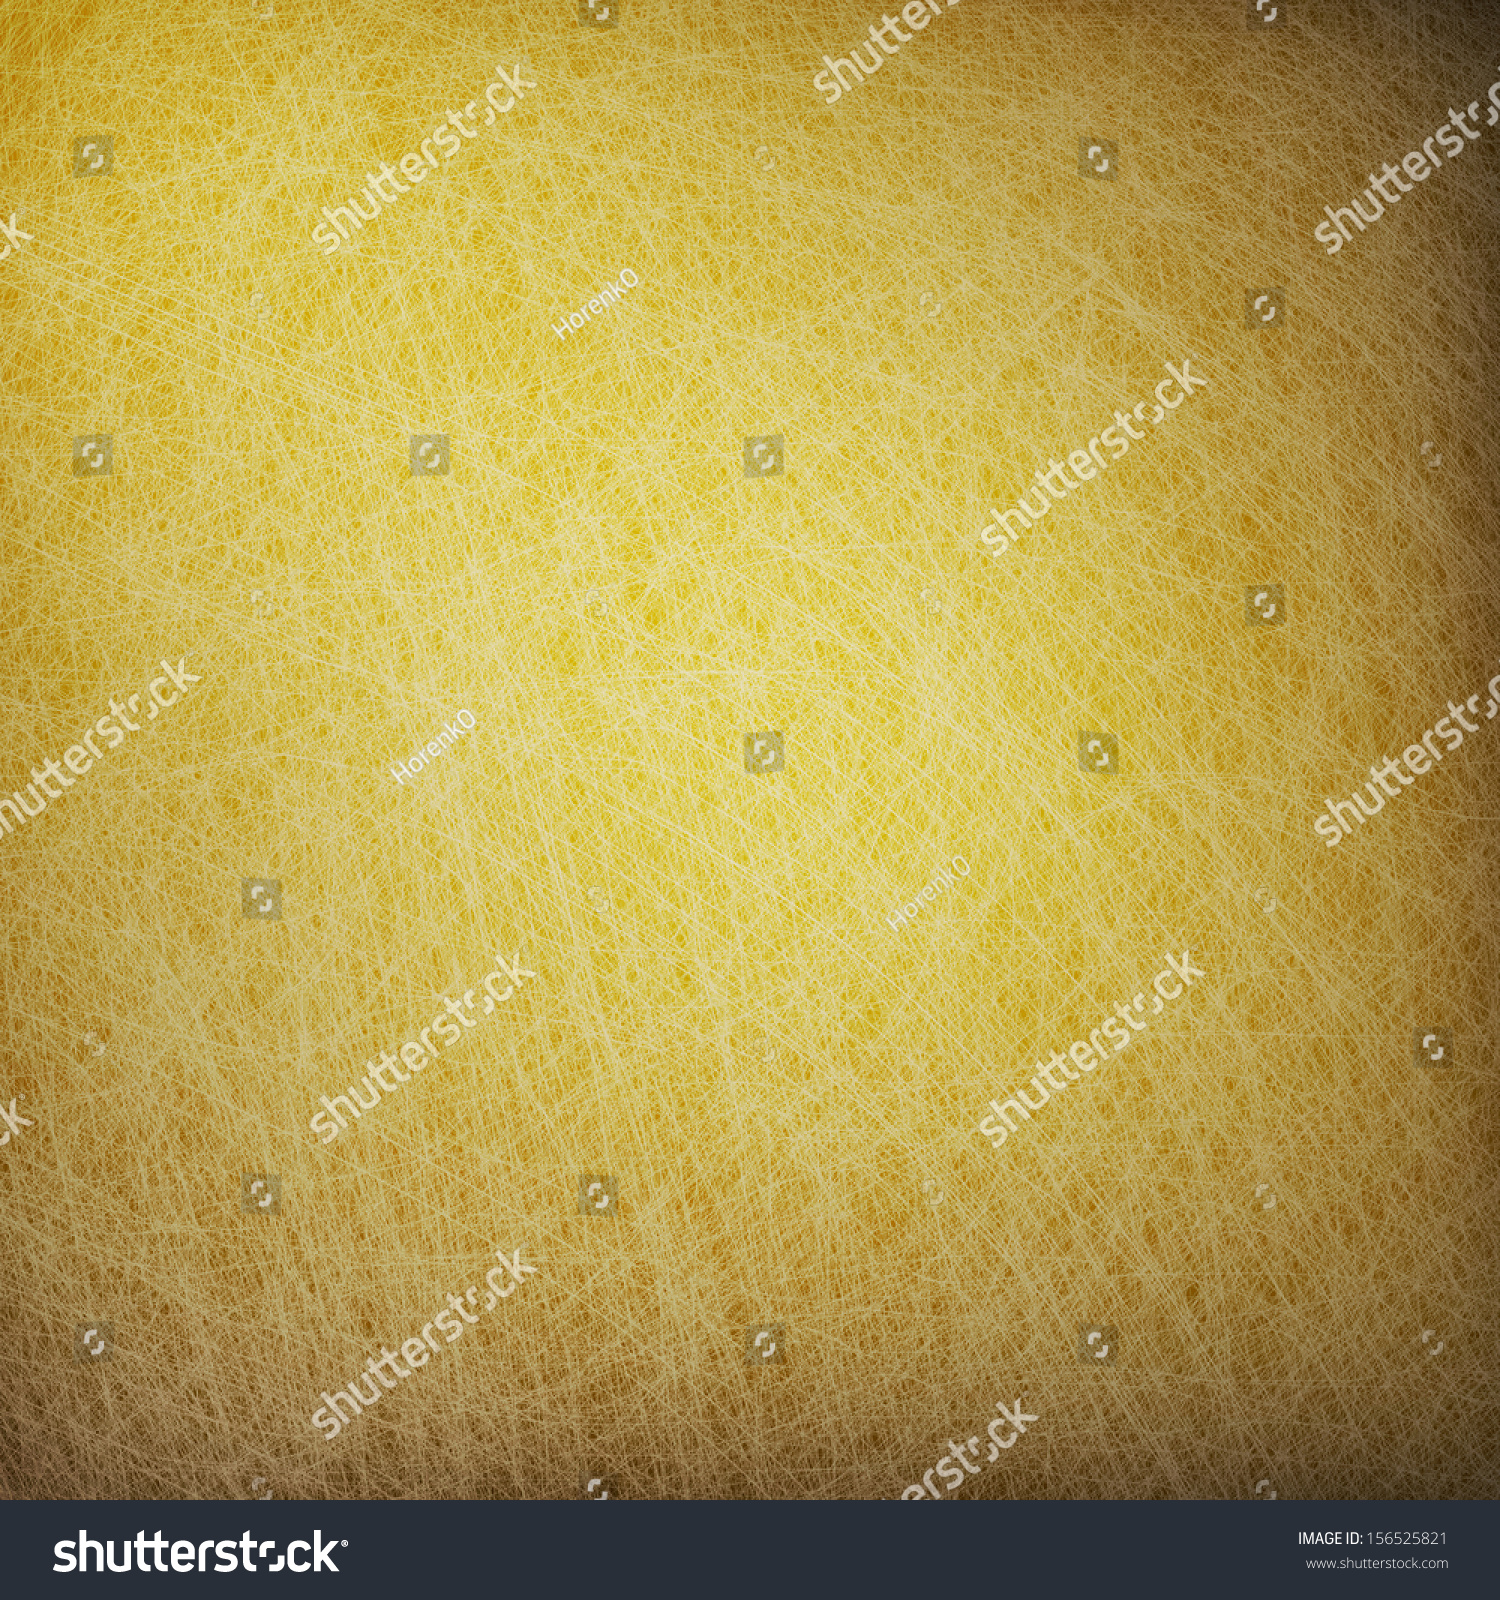 Detailed texture for background #156525821